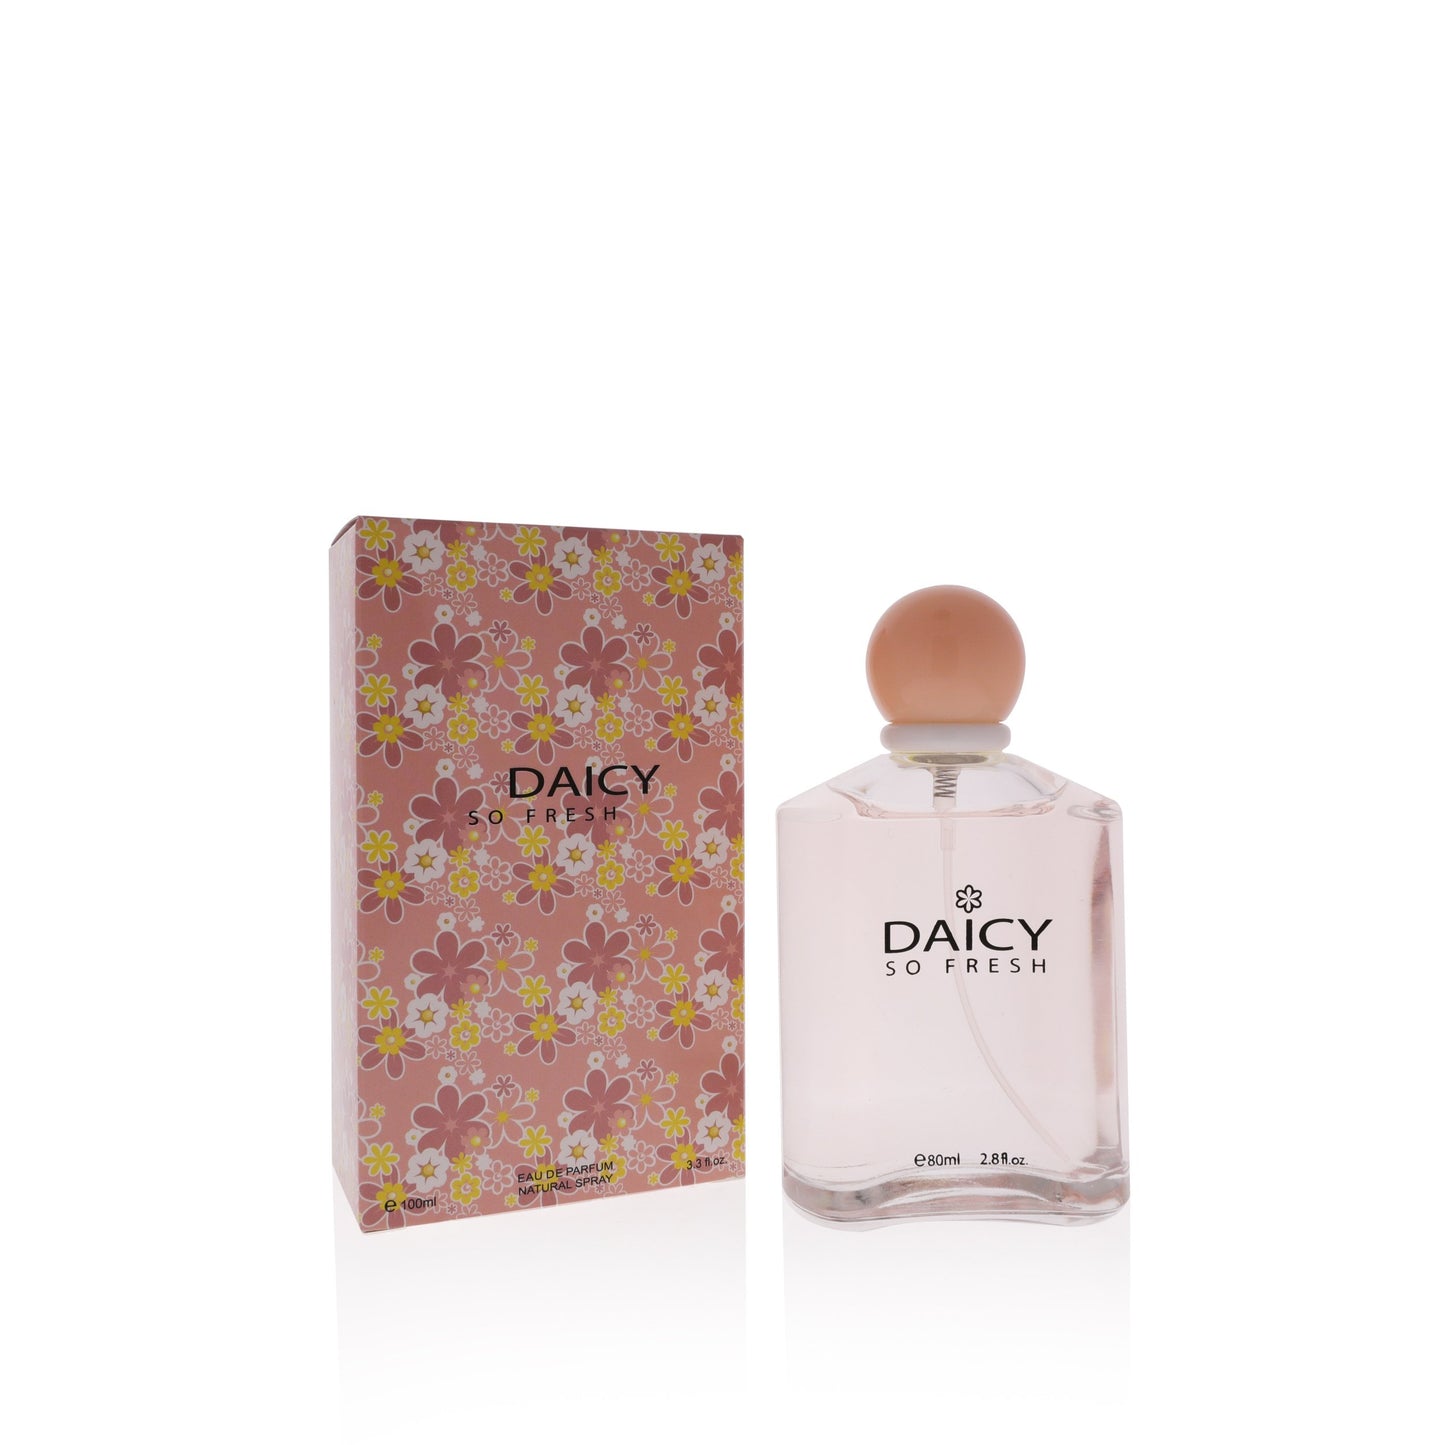 Daicy Women's Perfume: Blossom with Elegance and Grace - Discover the Allure of this Captivating Fragrance